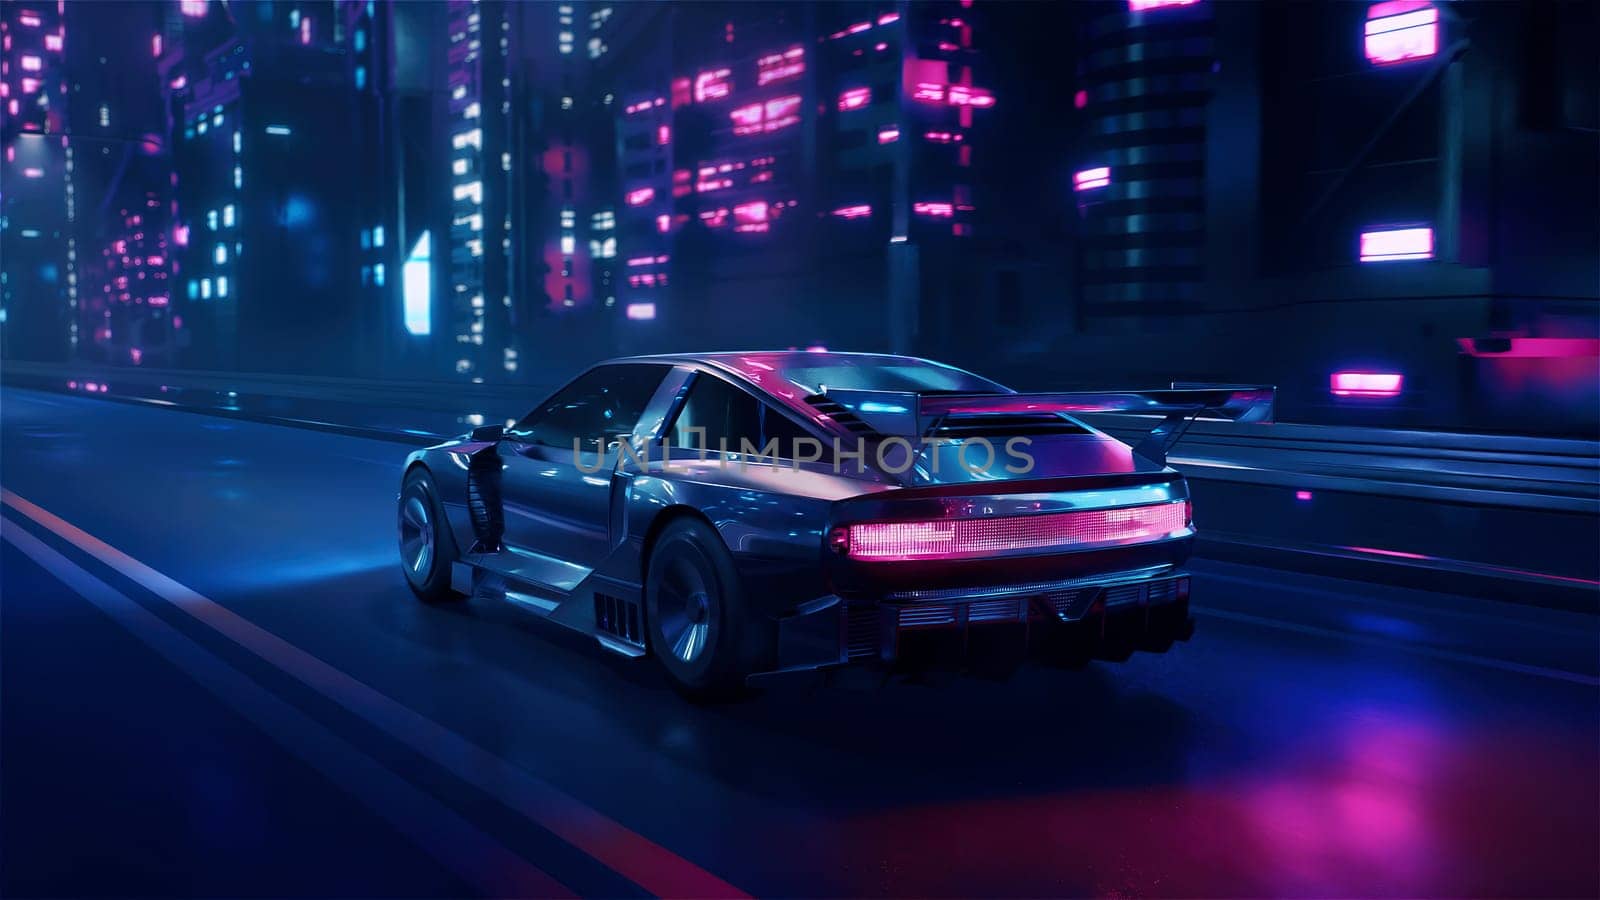 3d render car driving on the city streets at night with neon lights and in a cyberpunk style in 4k